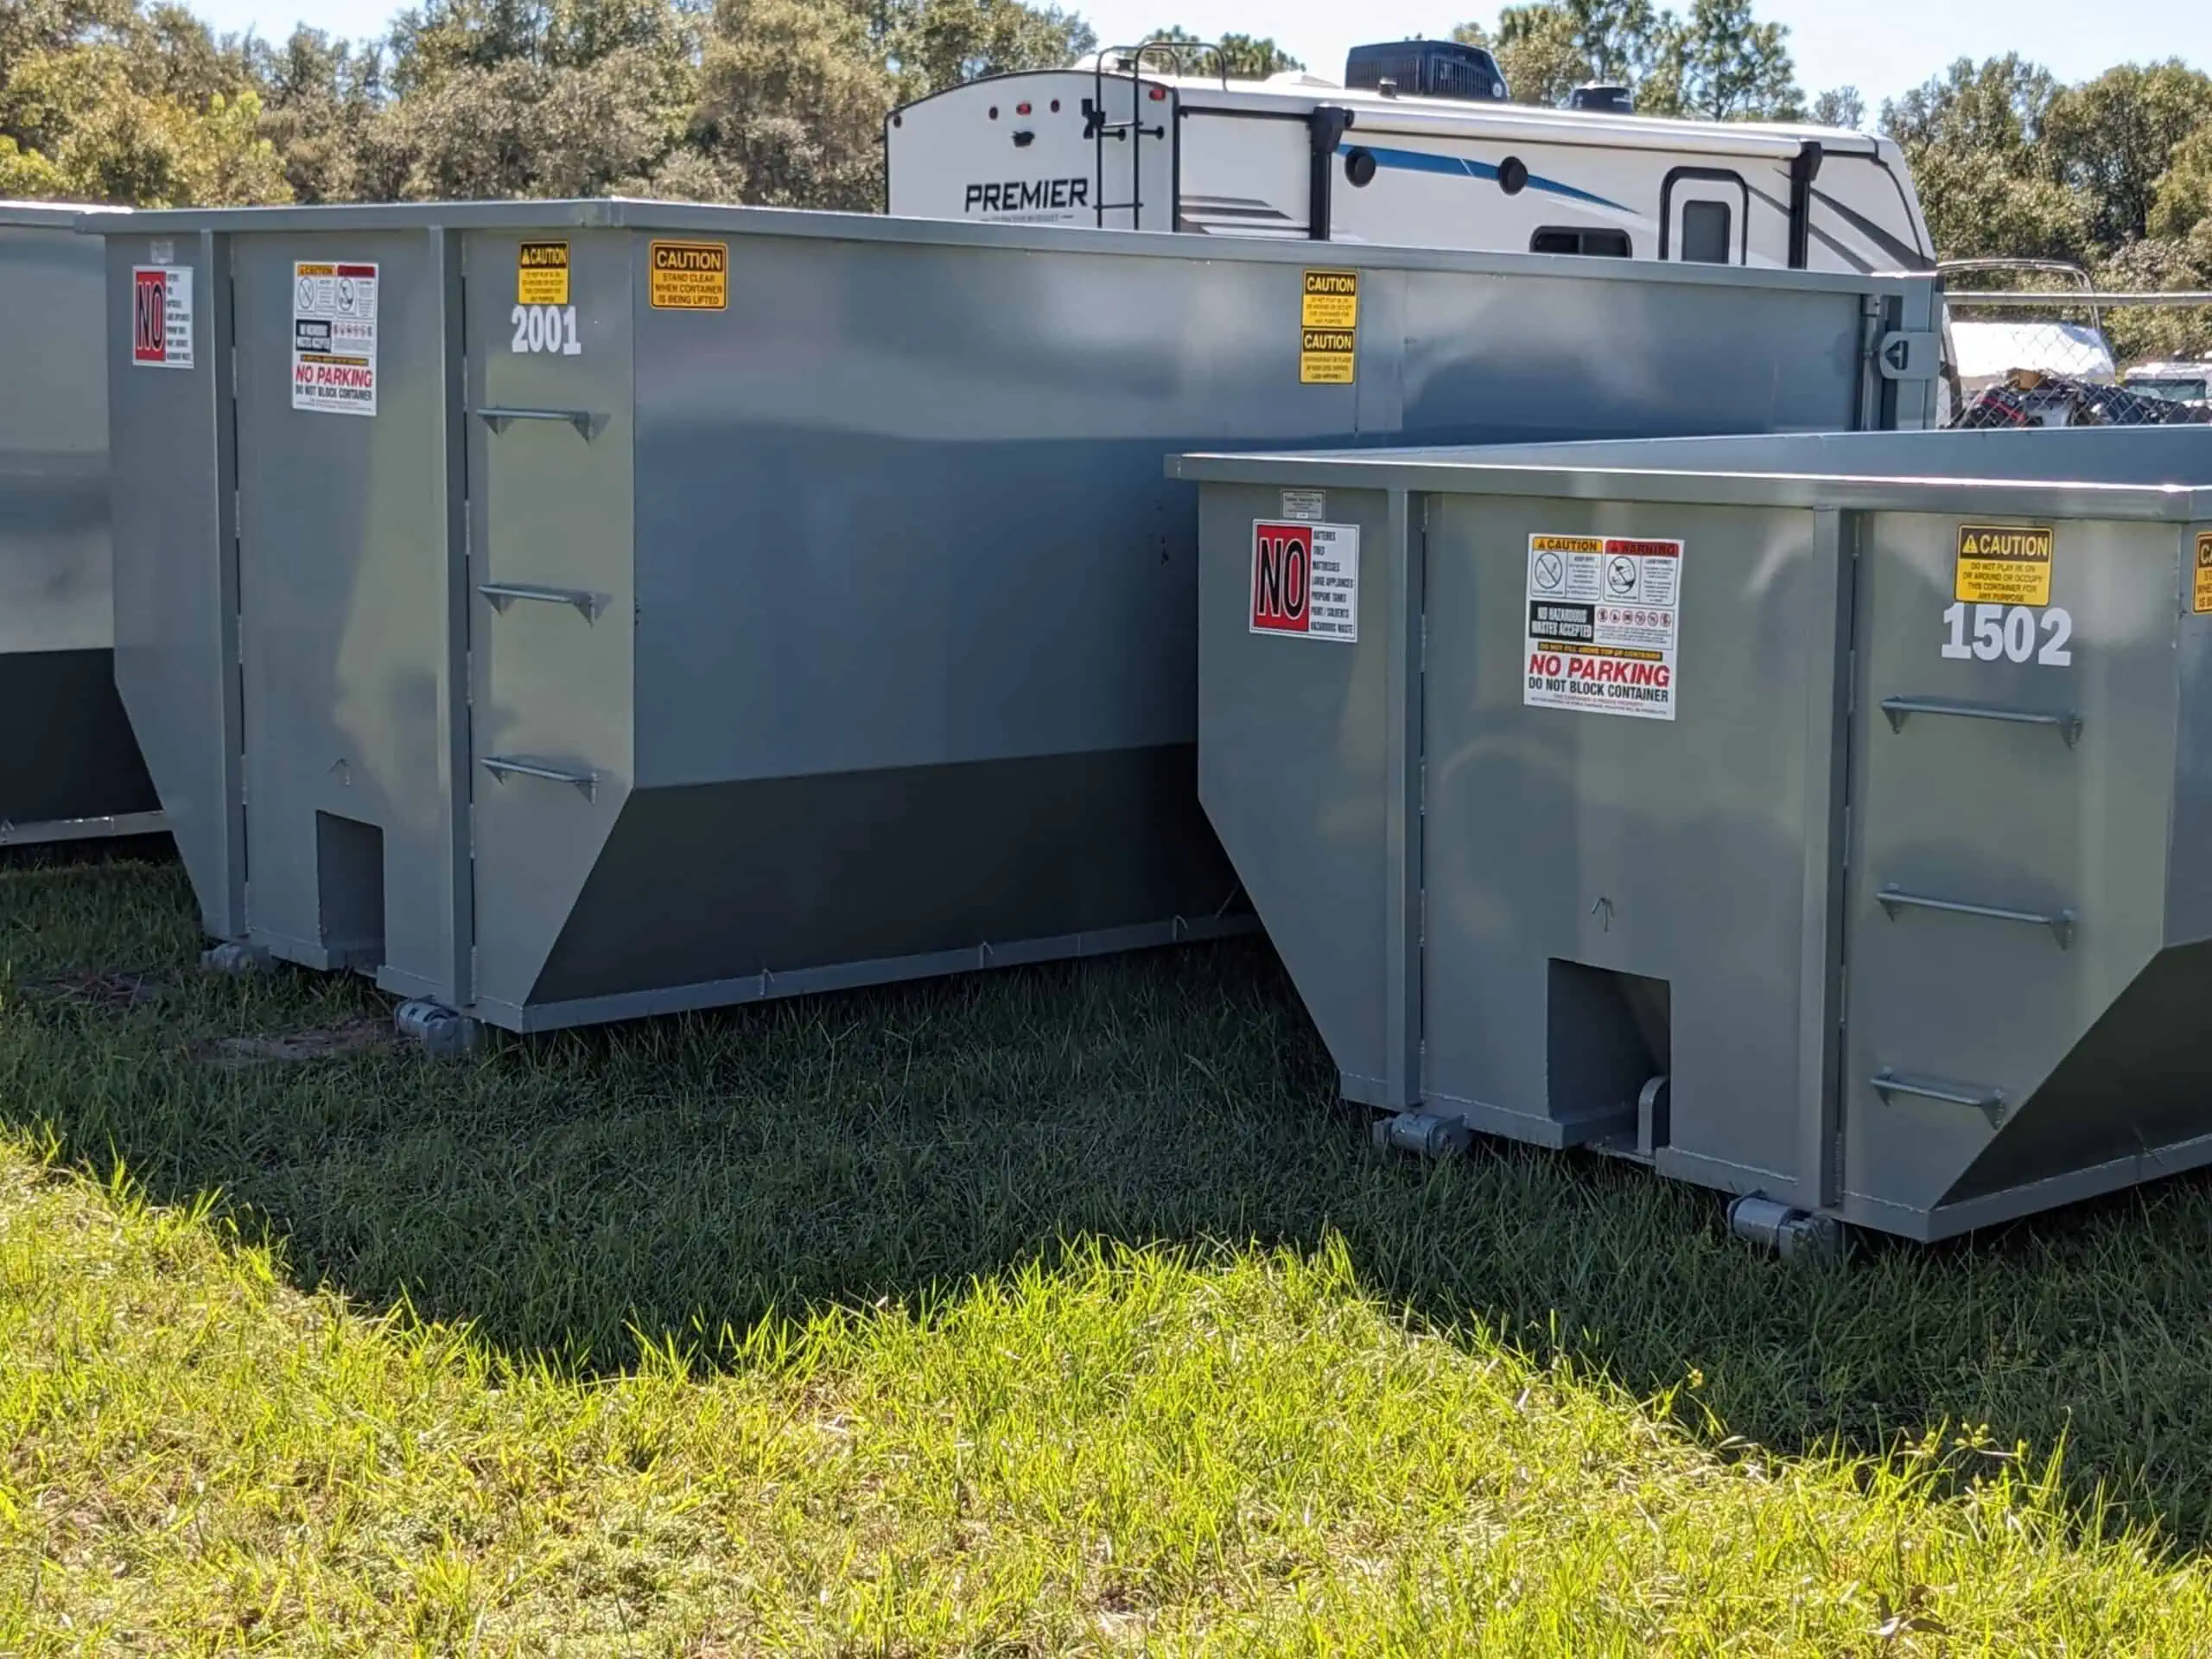  Multiple-sized dumpsters for waste management solutions by Yankee Dumpsters in Sorrento, FL.